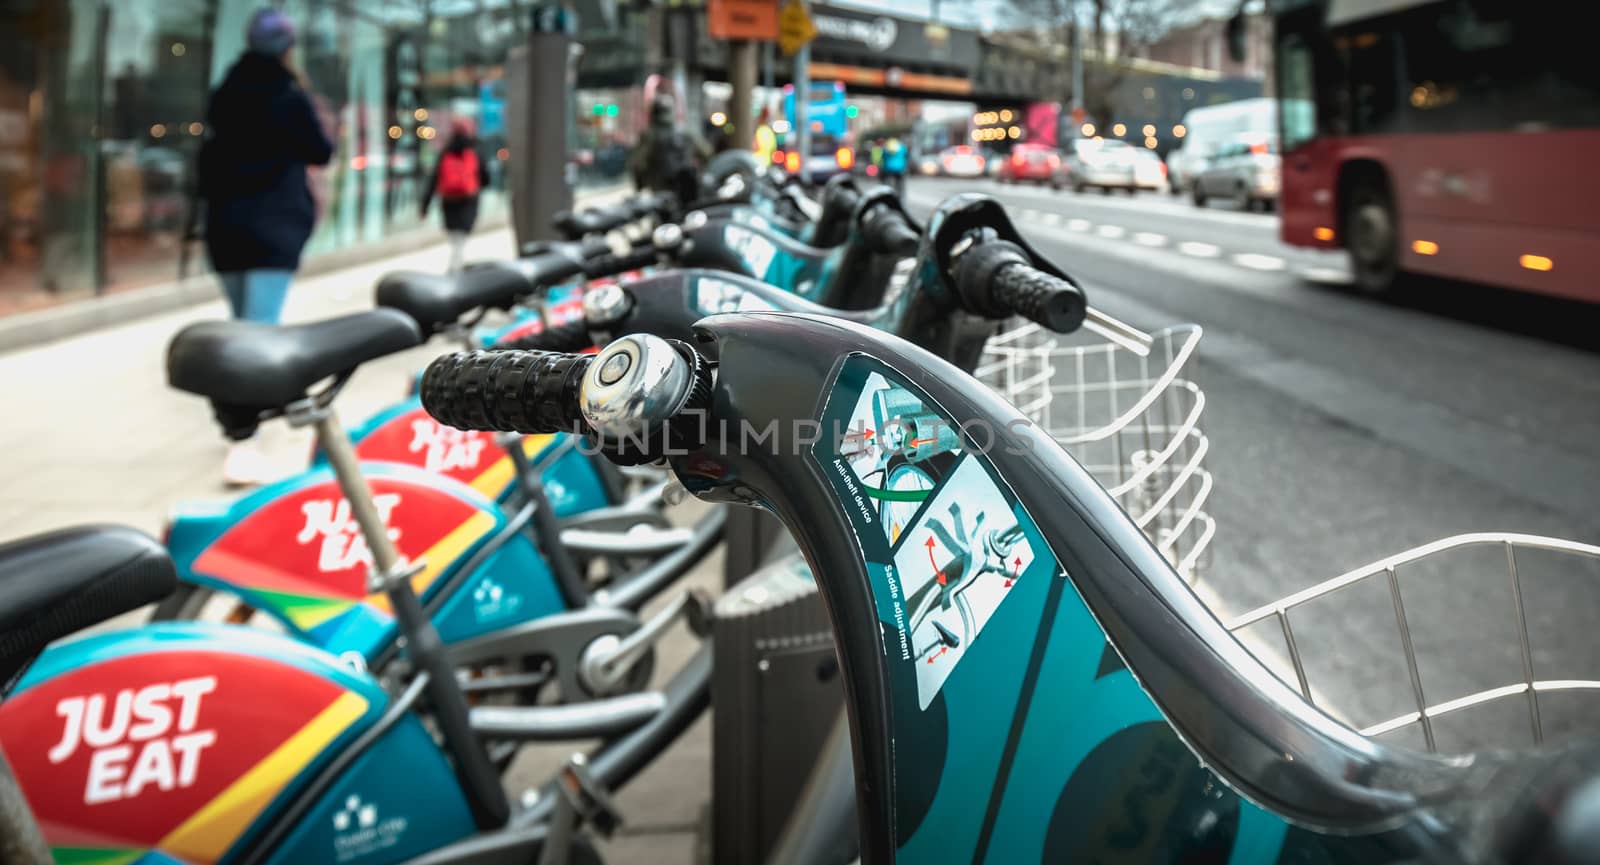 Dublin, Ireland - February 11, 2019: Detail of a shared public bike station Just Eat dublinbikes in the city center on a winter day